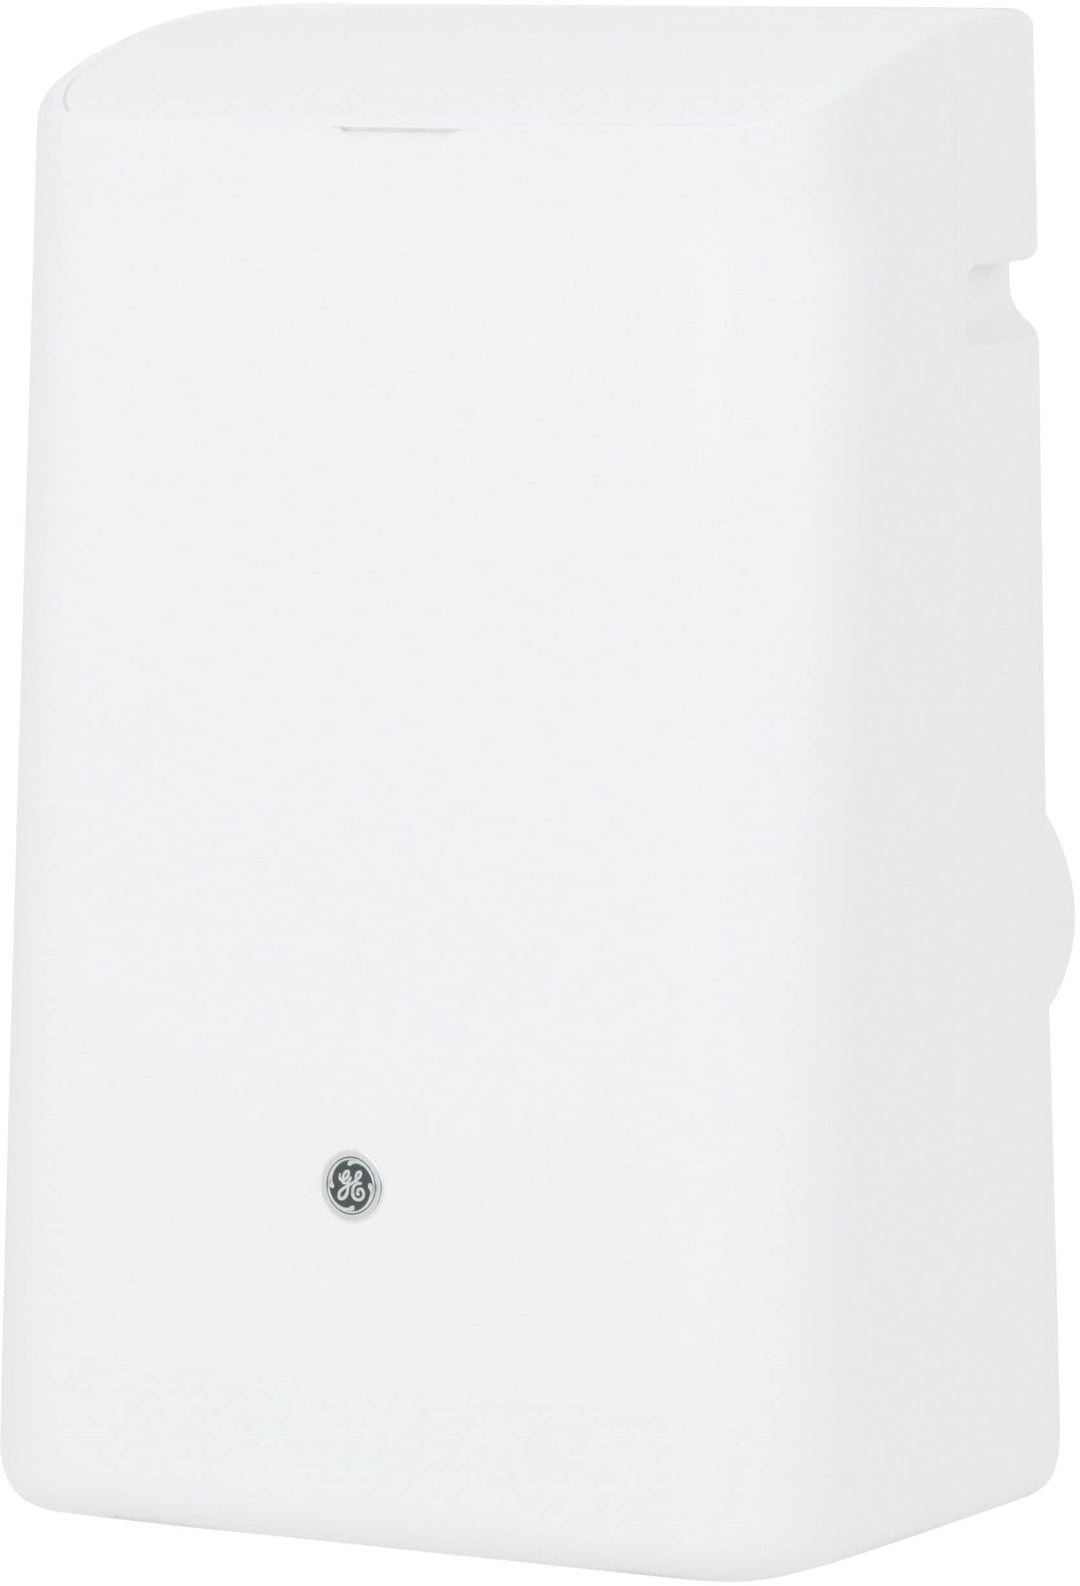 GE - 450 Sq. Ft. 11,000 BTU Smart Portable Air Conditioner  with WiFi and Remote - White_0